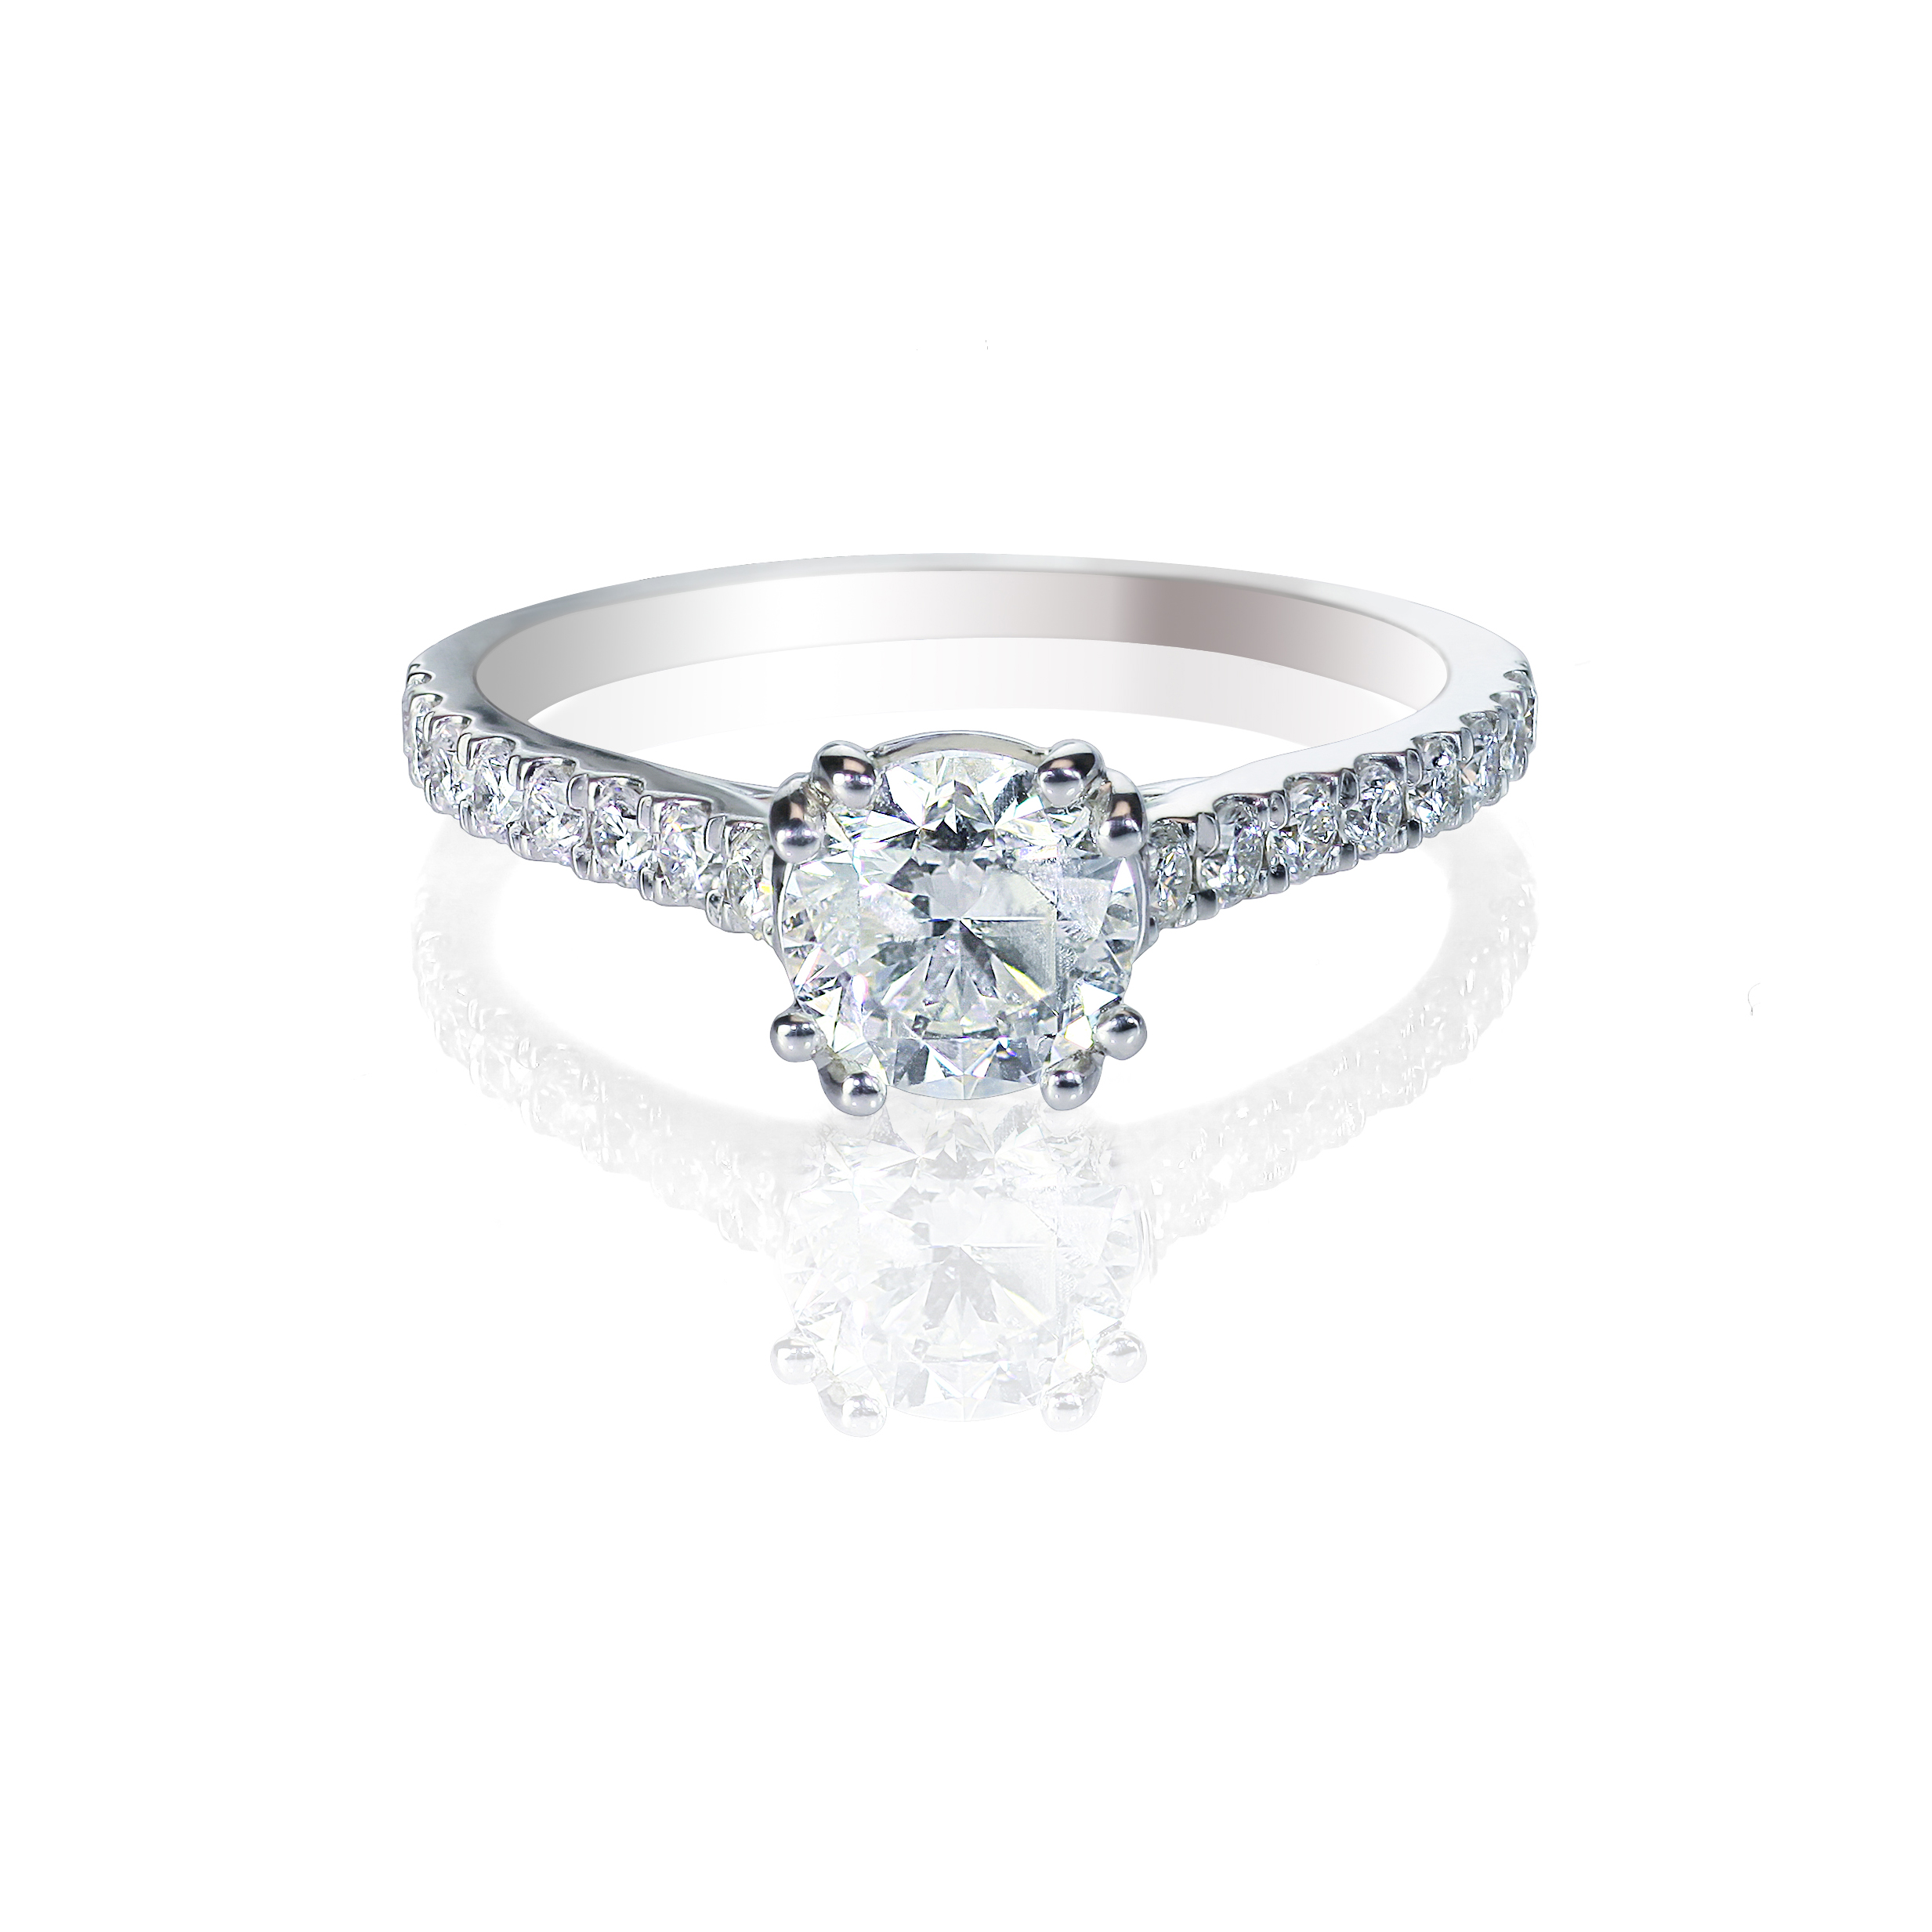 Diamond solitaire engagment wedding ring isolated on white